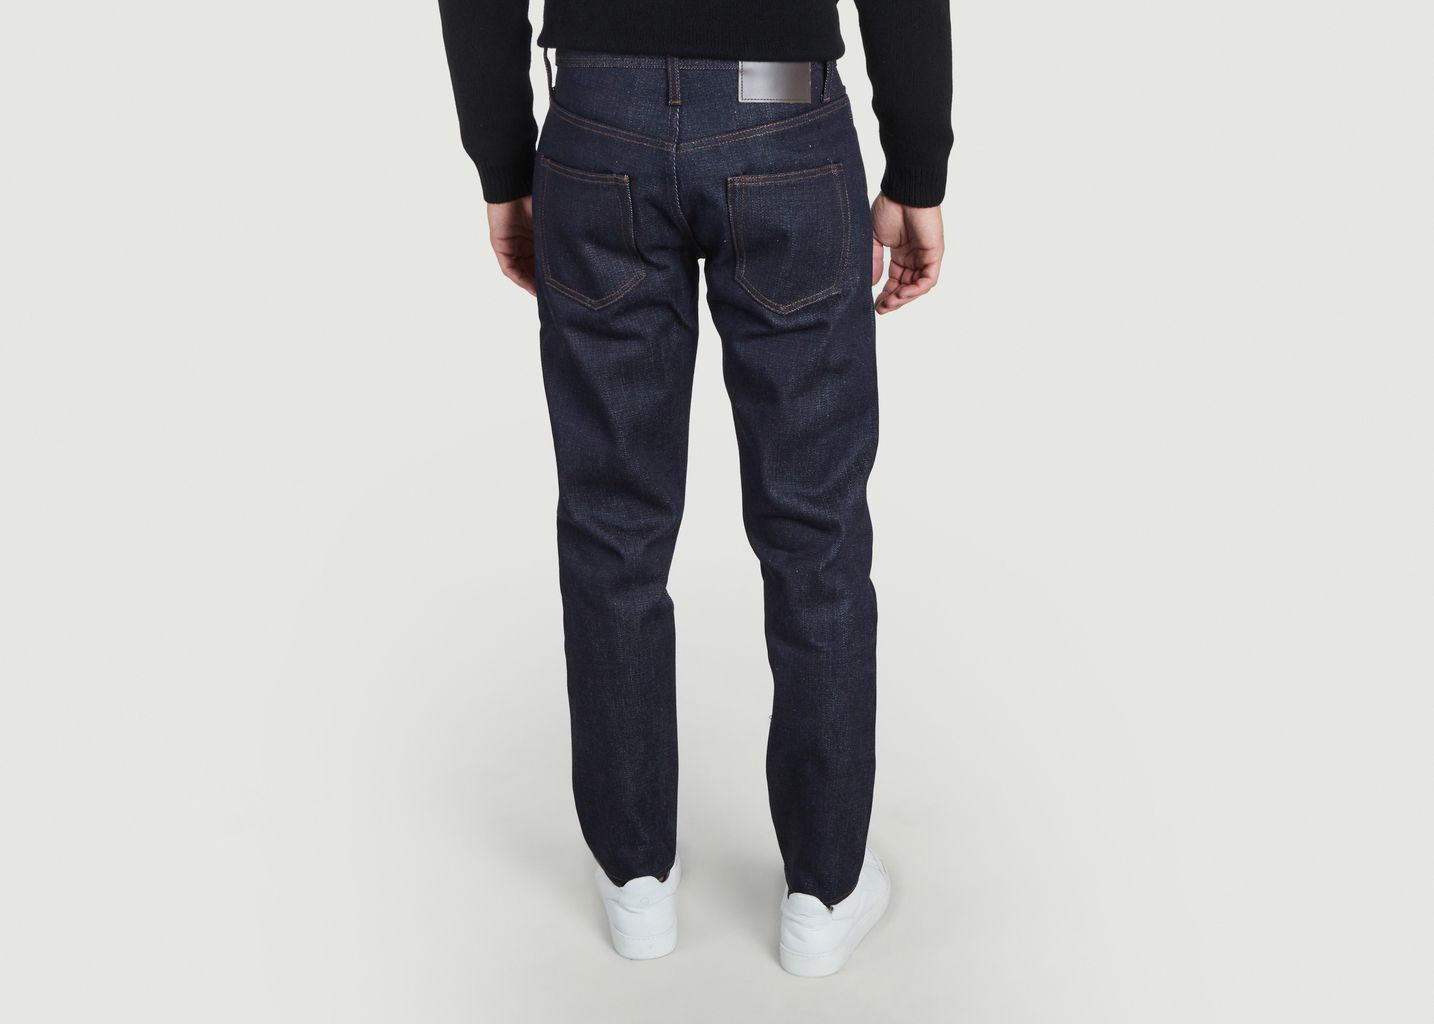 https://media.lexception.com/img/products/the-unbranded-brand/135883-the-unbranded-brand-jeanub621relaxedtapered21ozindigoselvedge-03.jpg